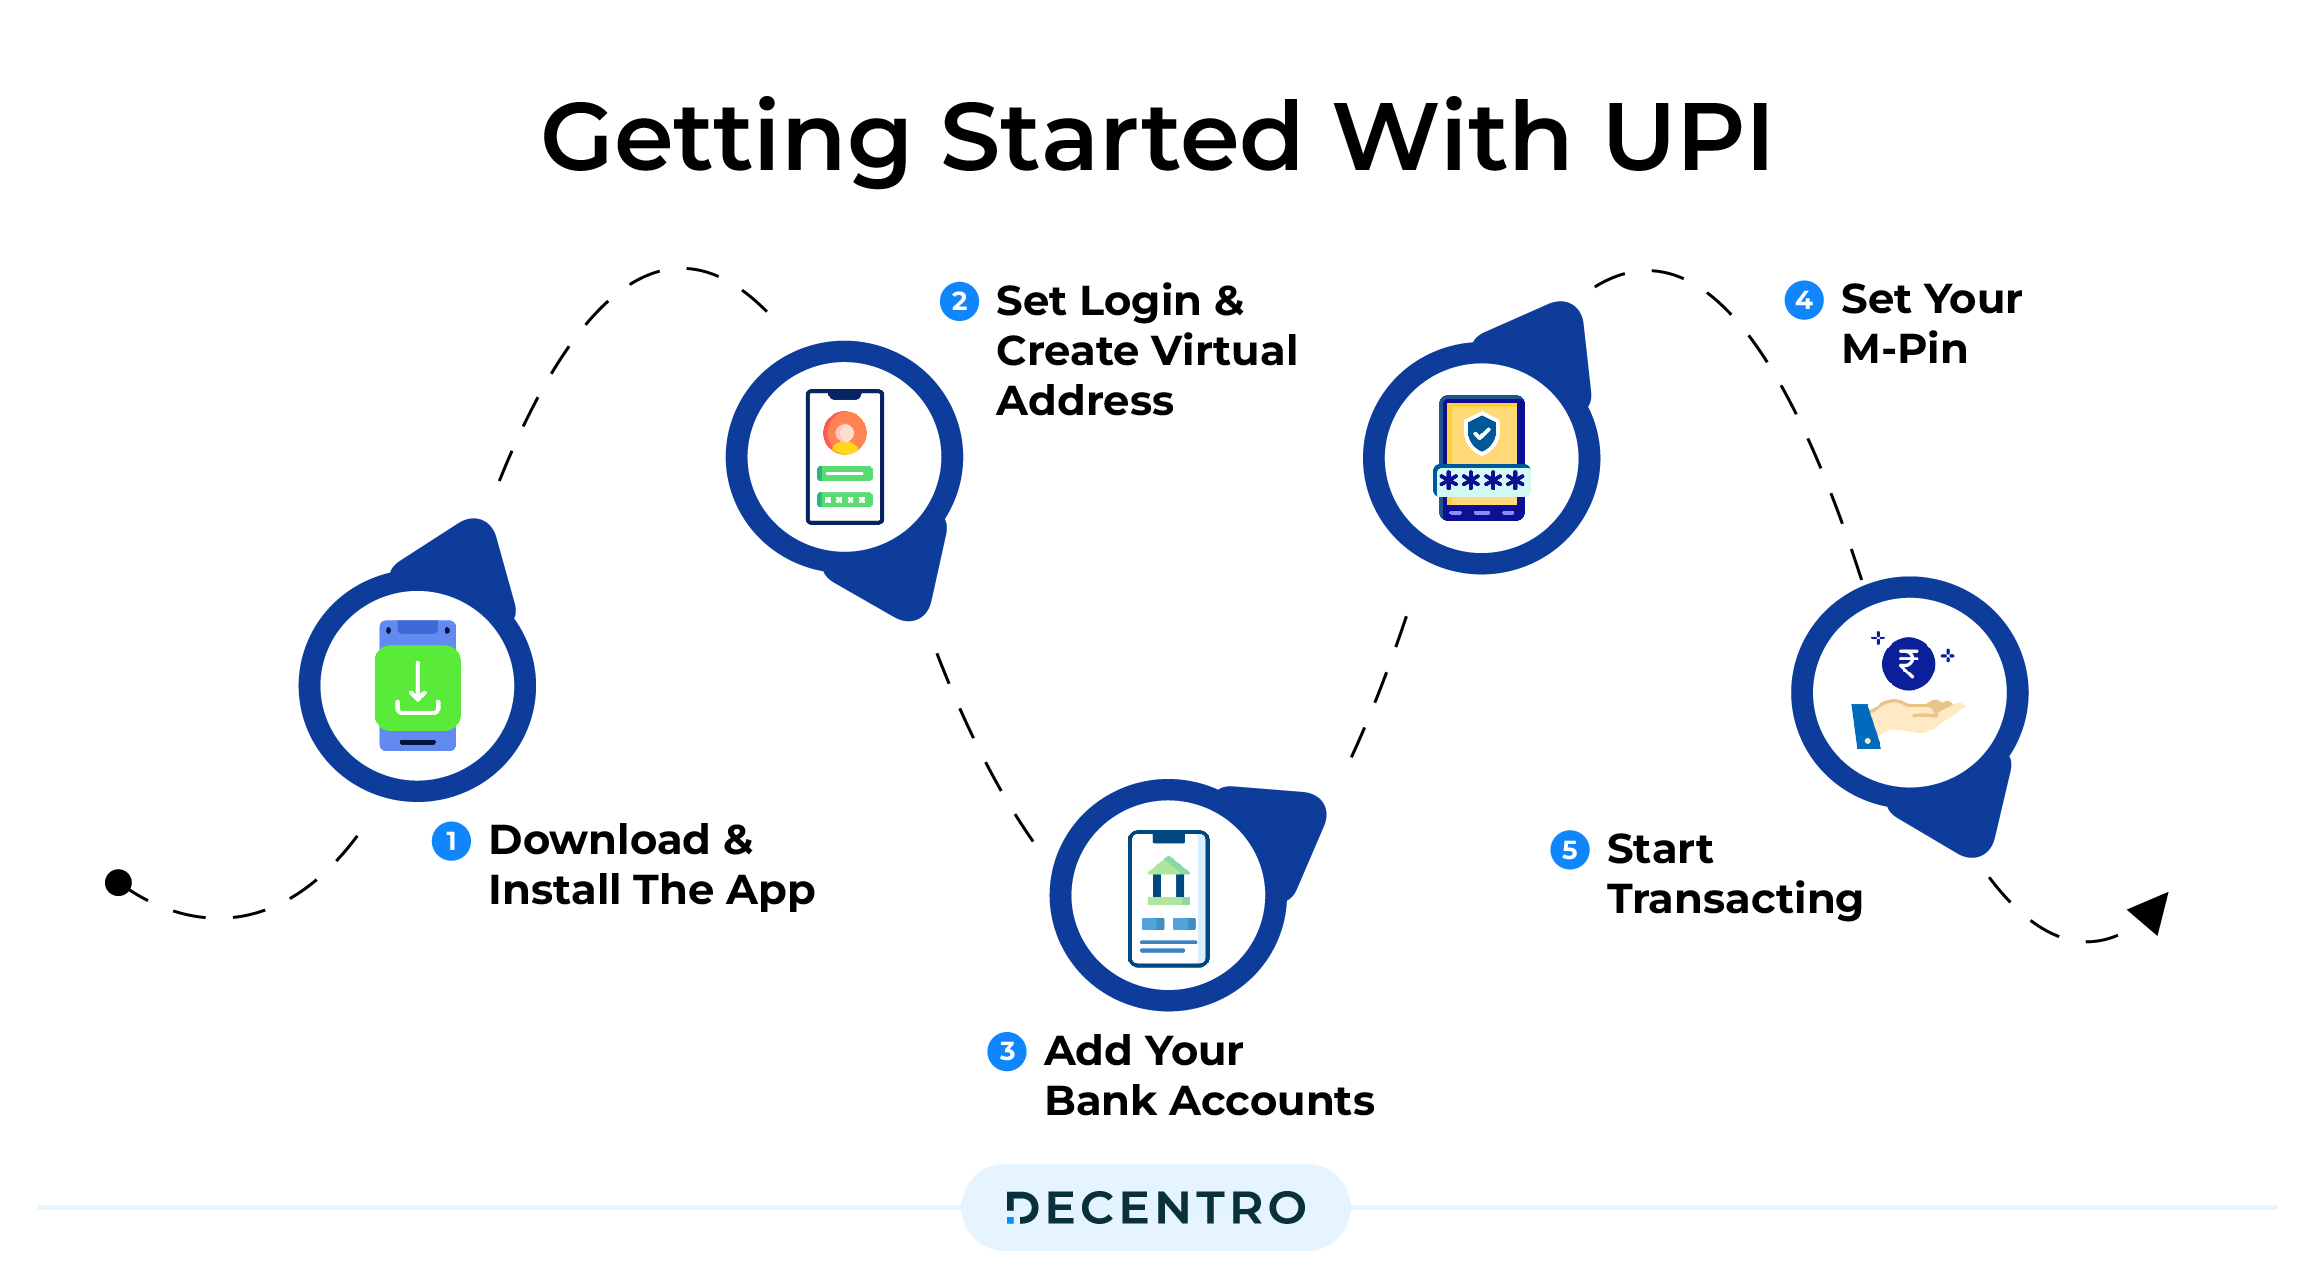 Getting Started with UPI